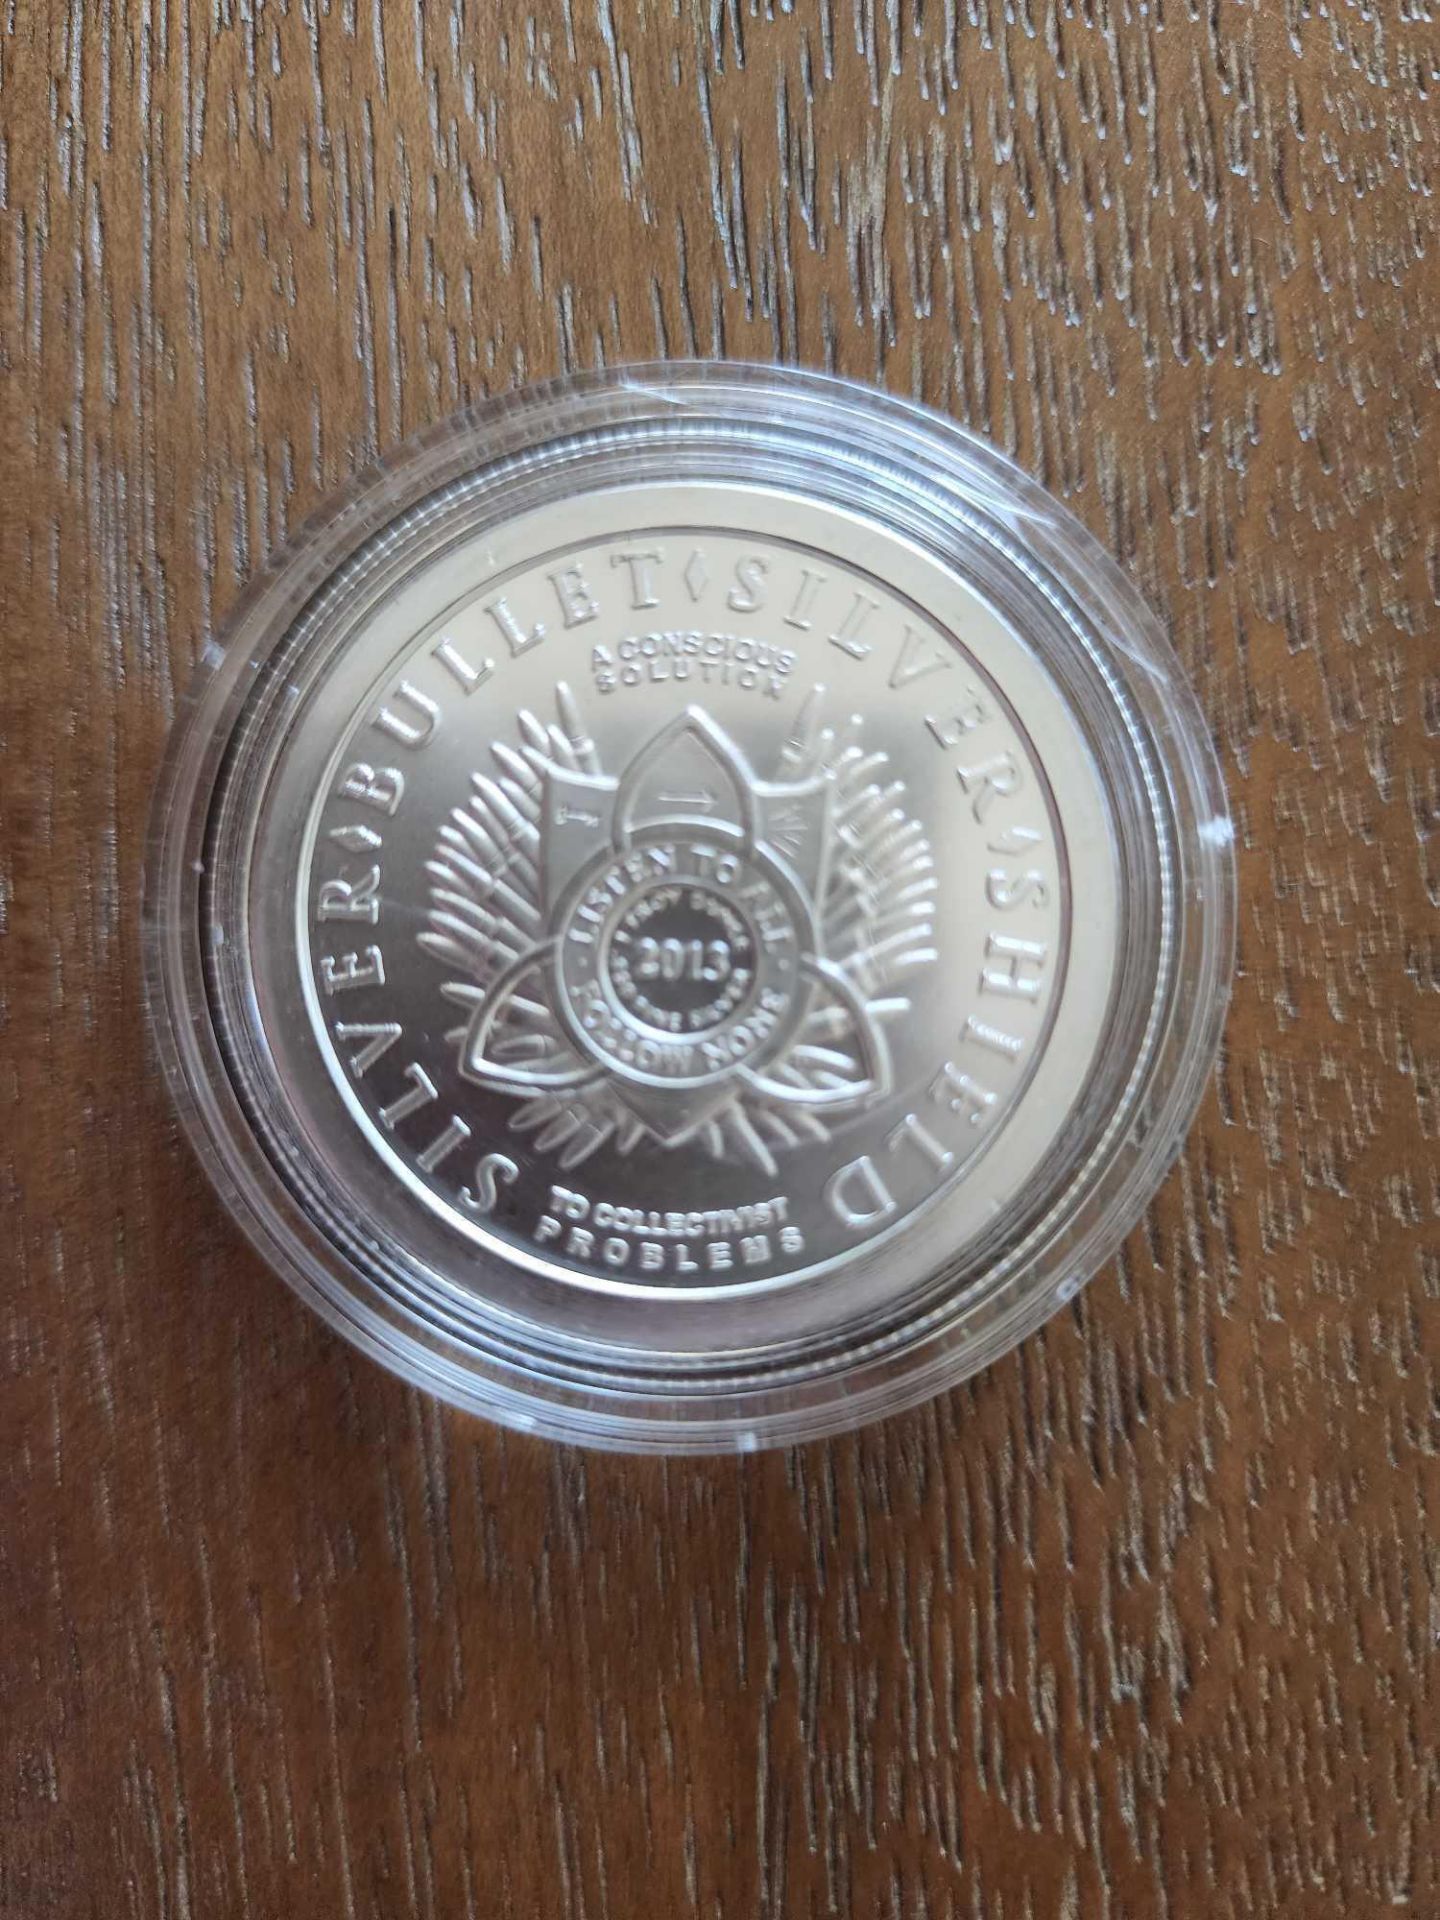 Silver Shield Debt and Death Silver Coin - Image 2 of 2